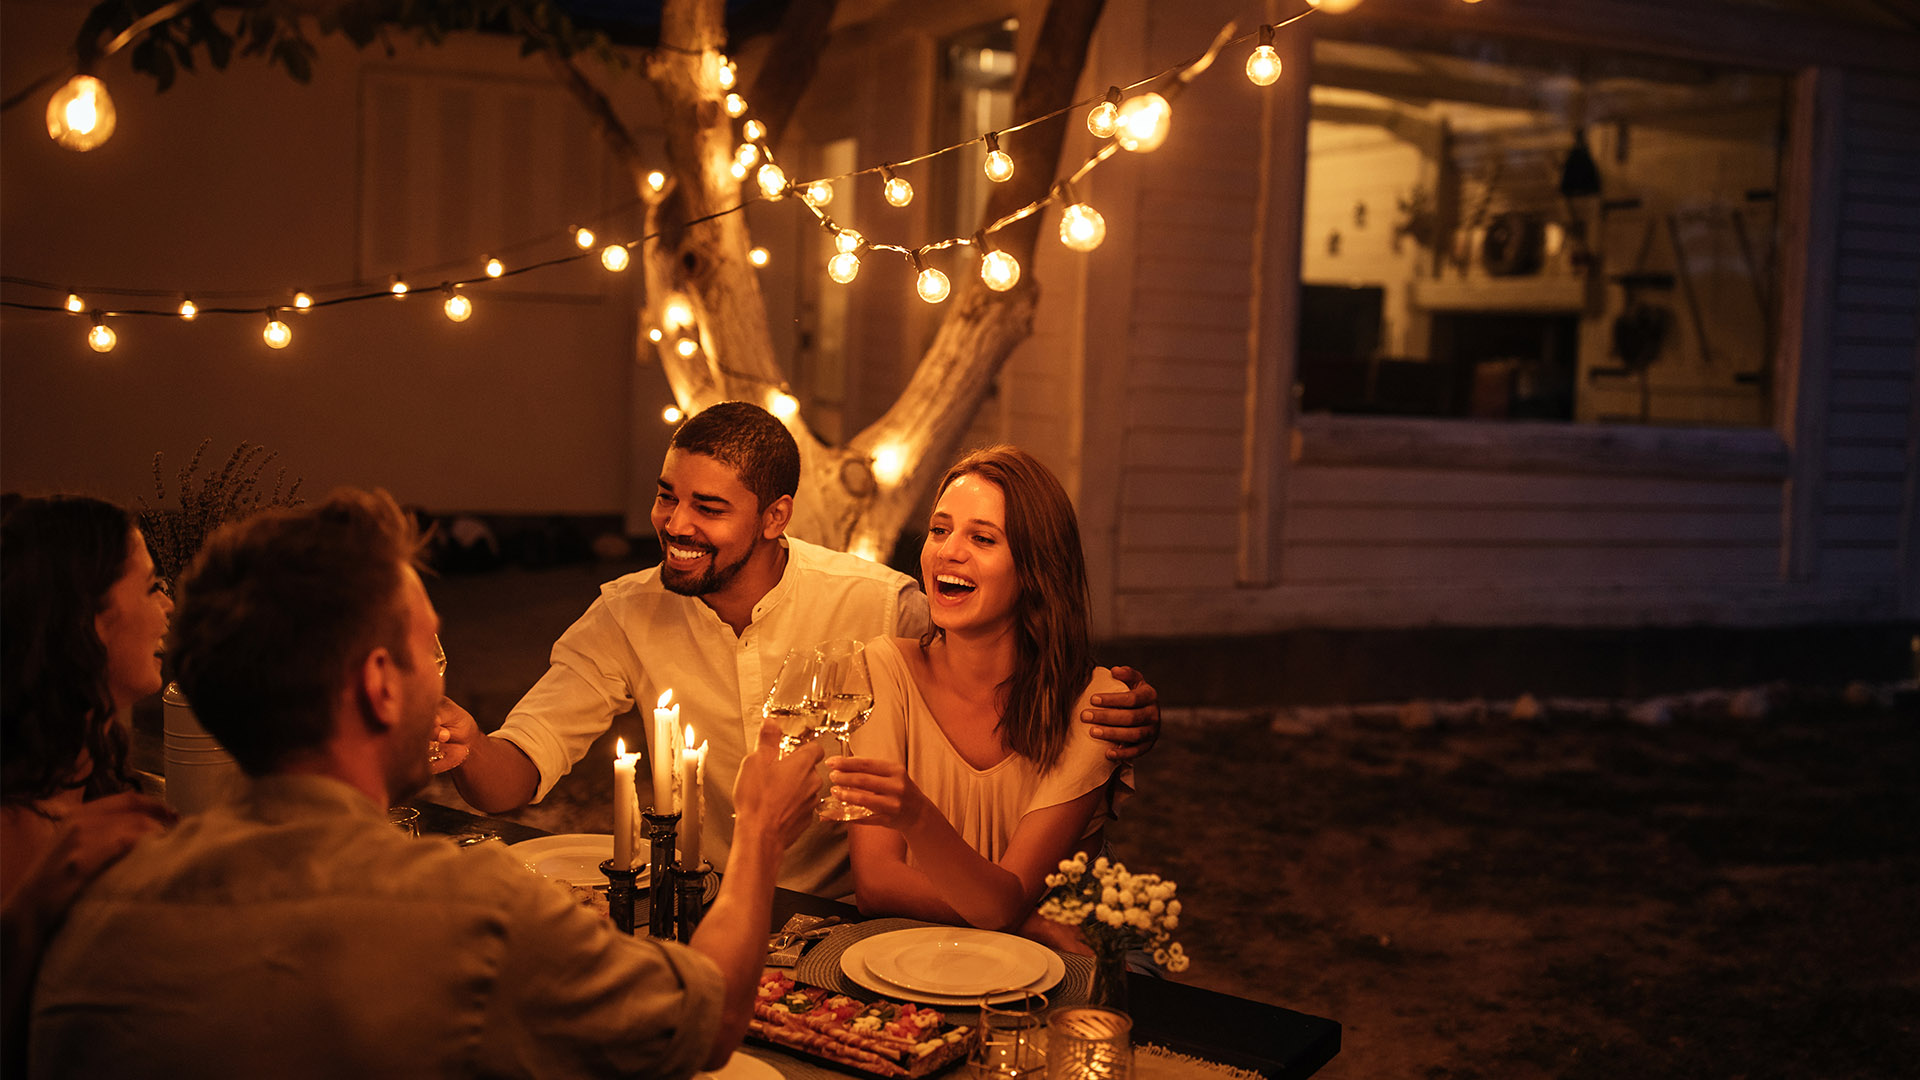 Two couples holding up their glasses for a toast at a picnic table under string lights in a backyard.  